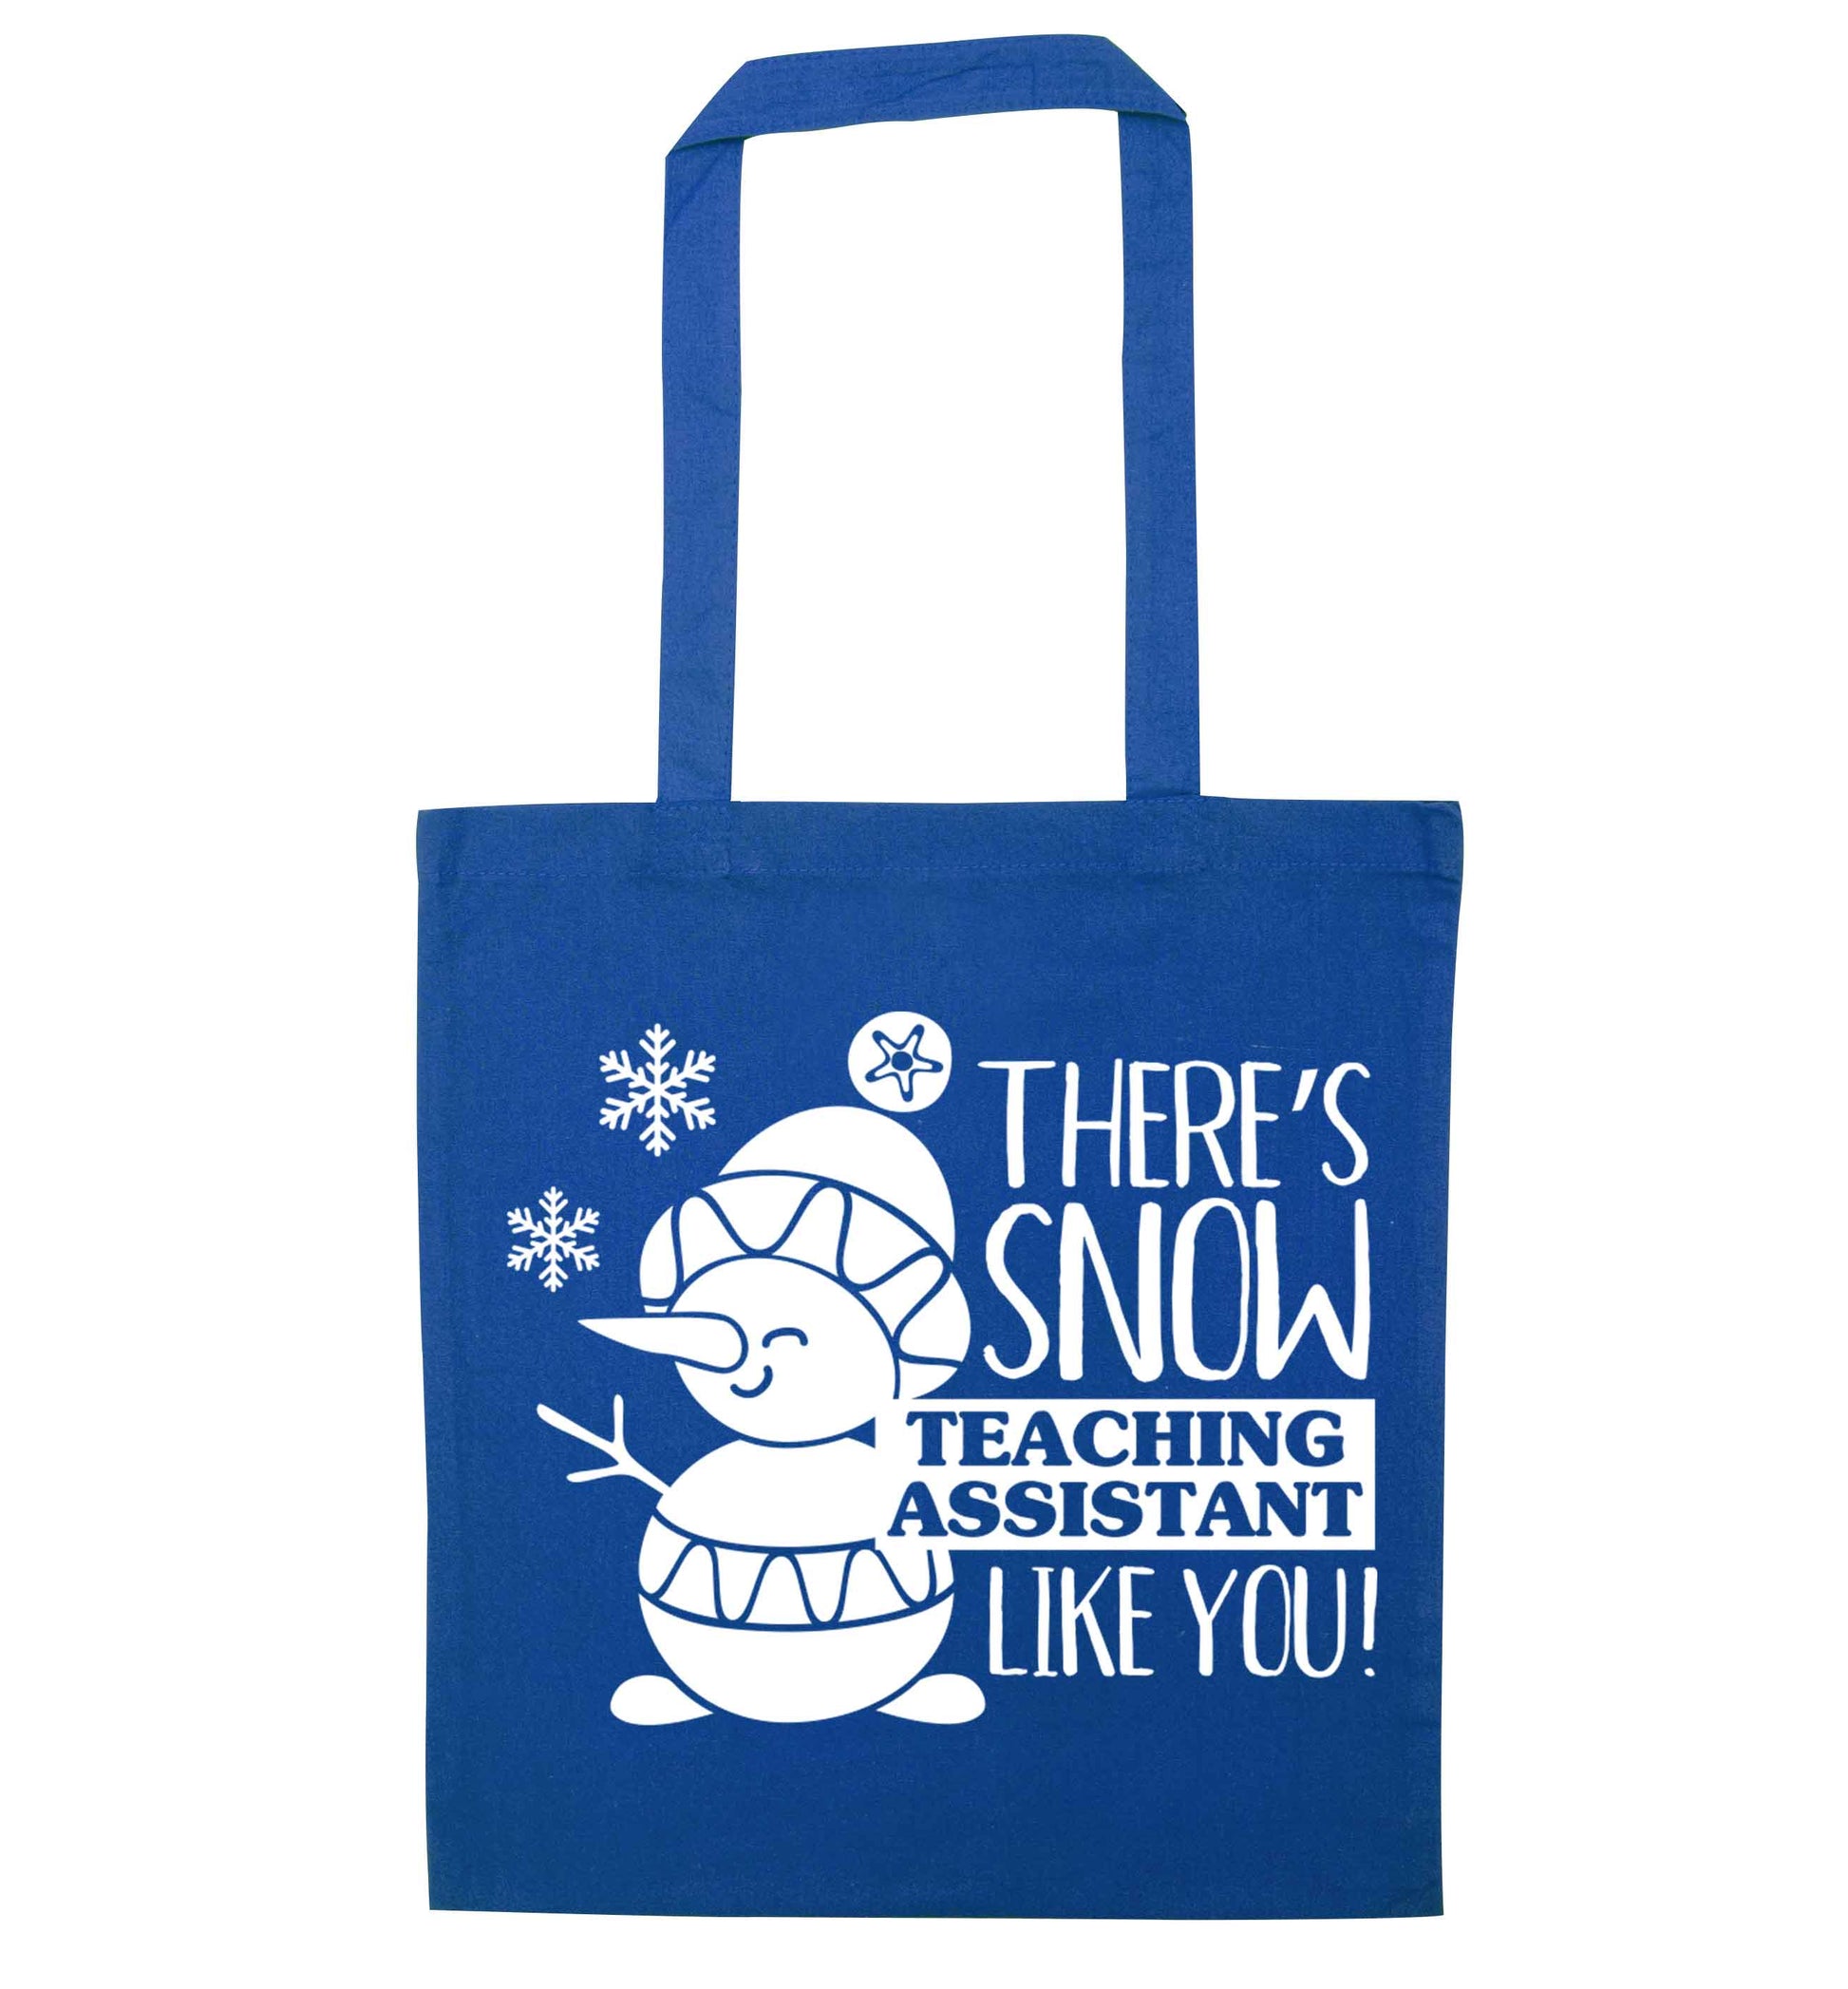 There's snow teaching assistant like you blue tote bag